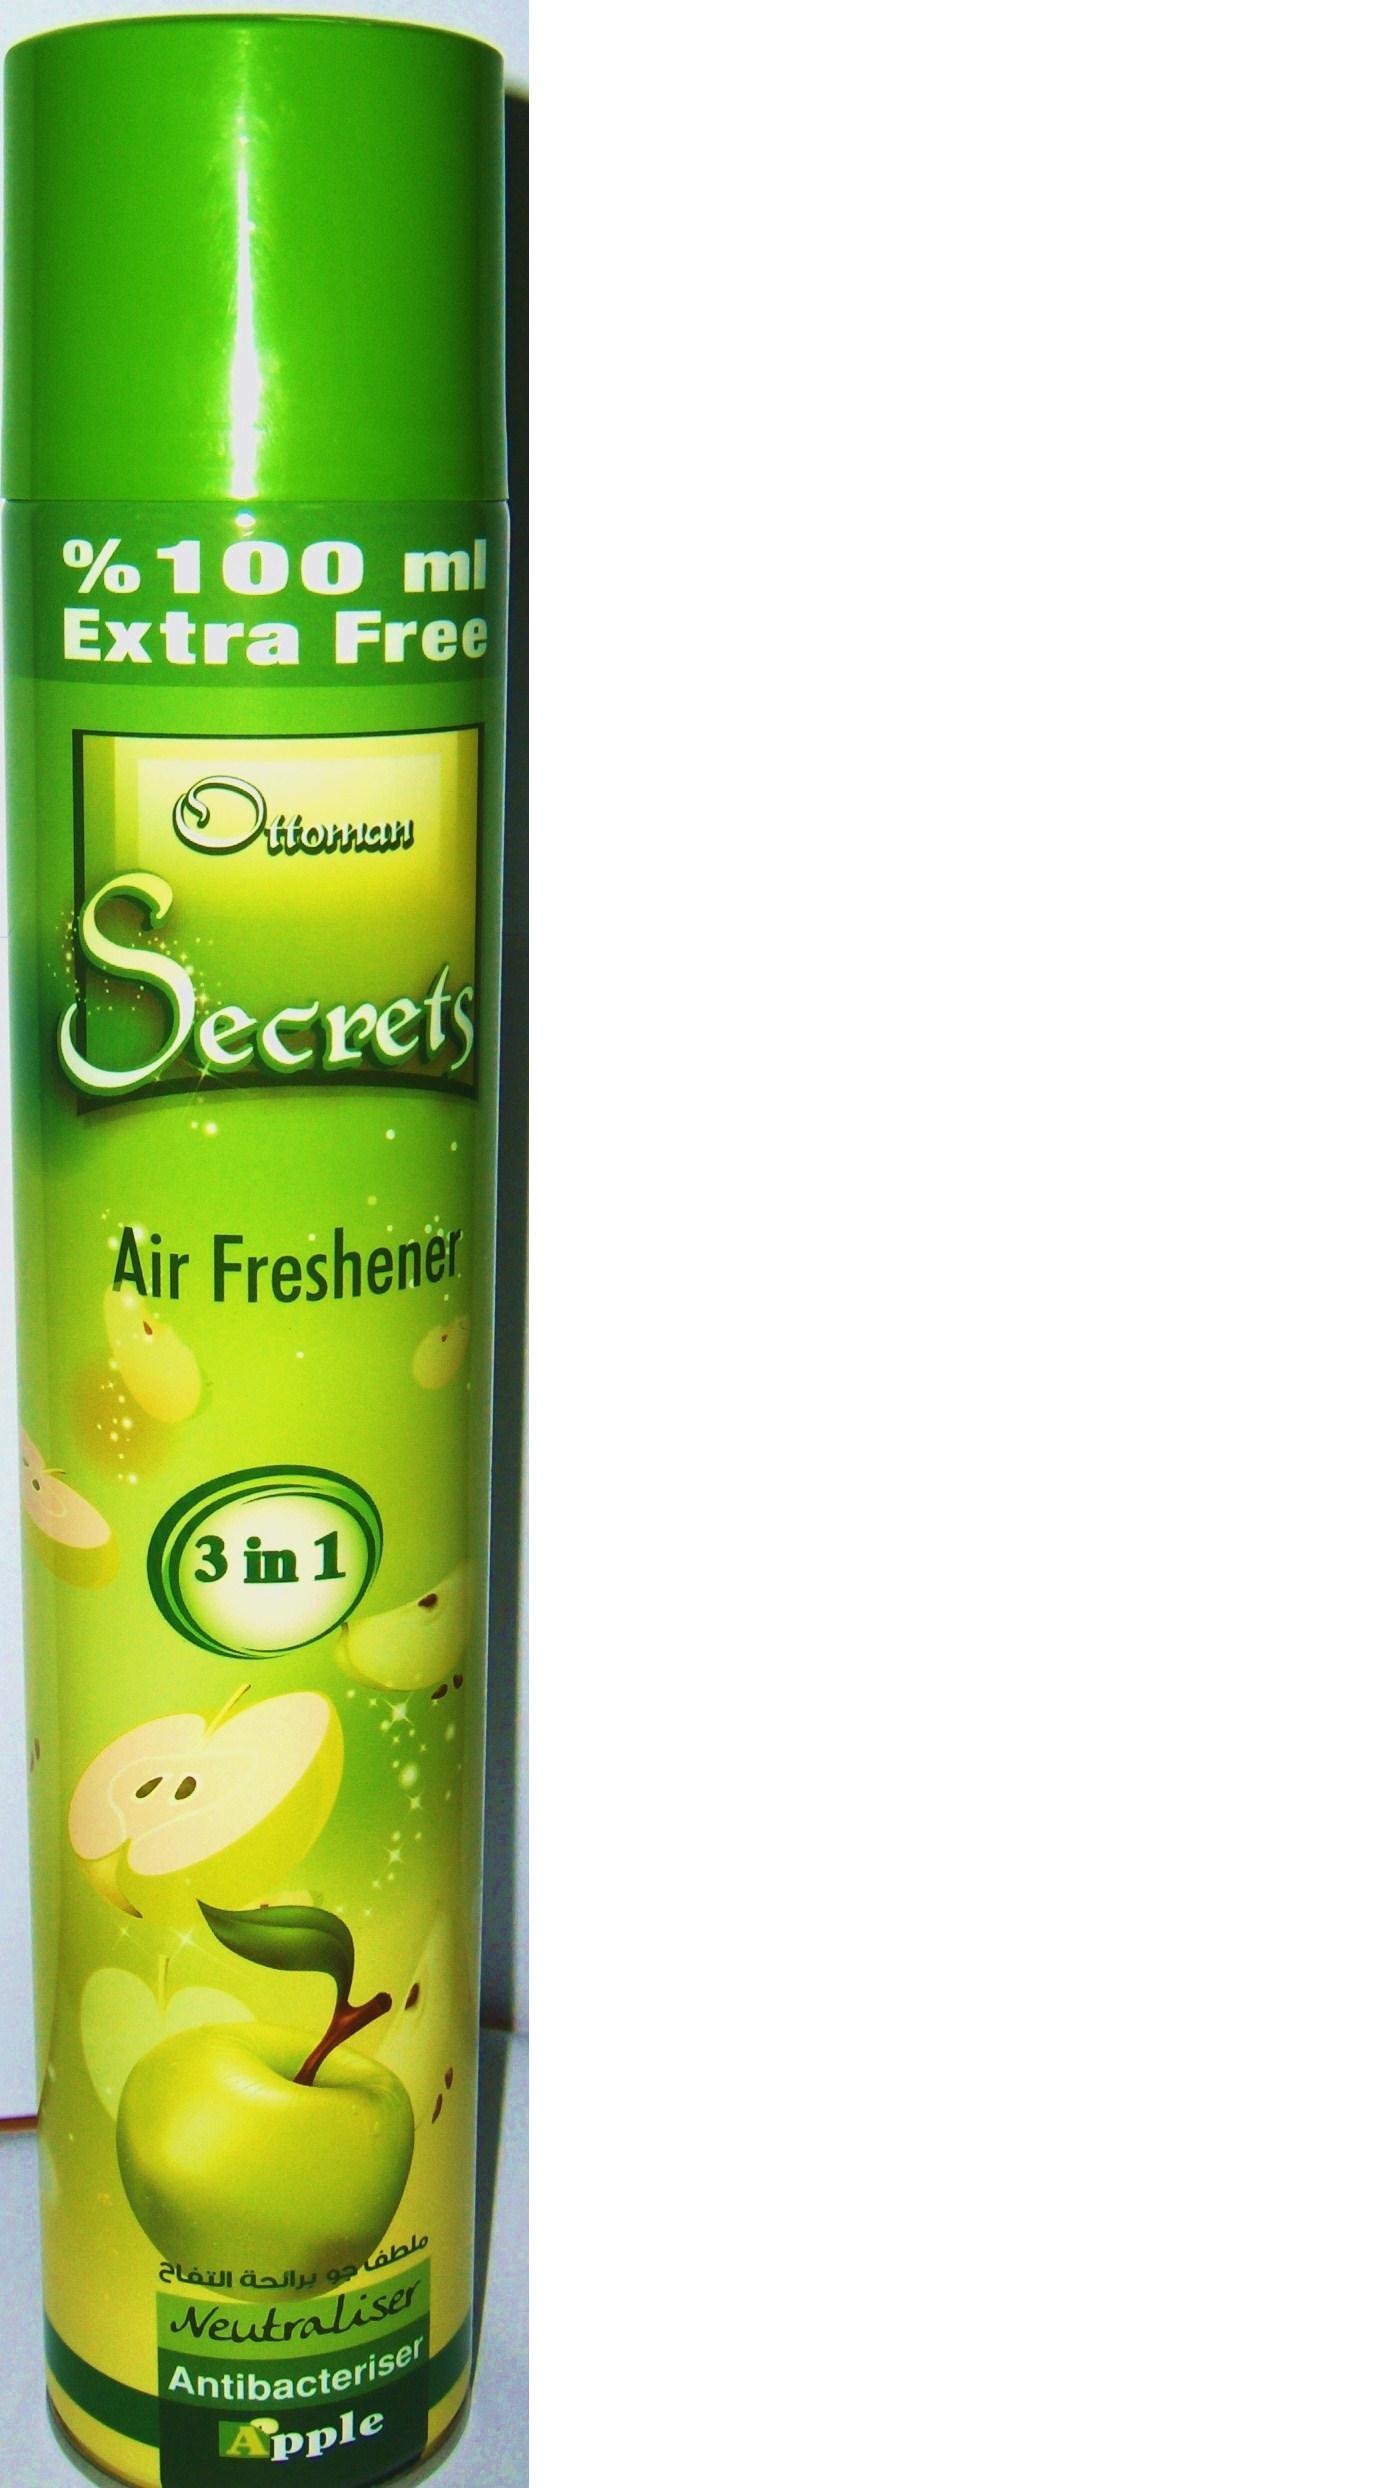 HOW TO MAKE AIR FRESHENERS AT HOME - ESSORTMENT ARTICLES: FREE